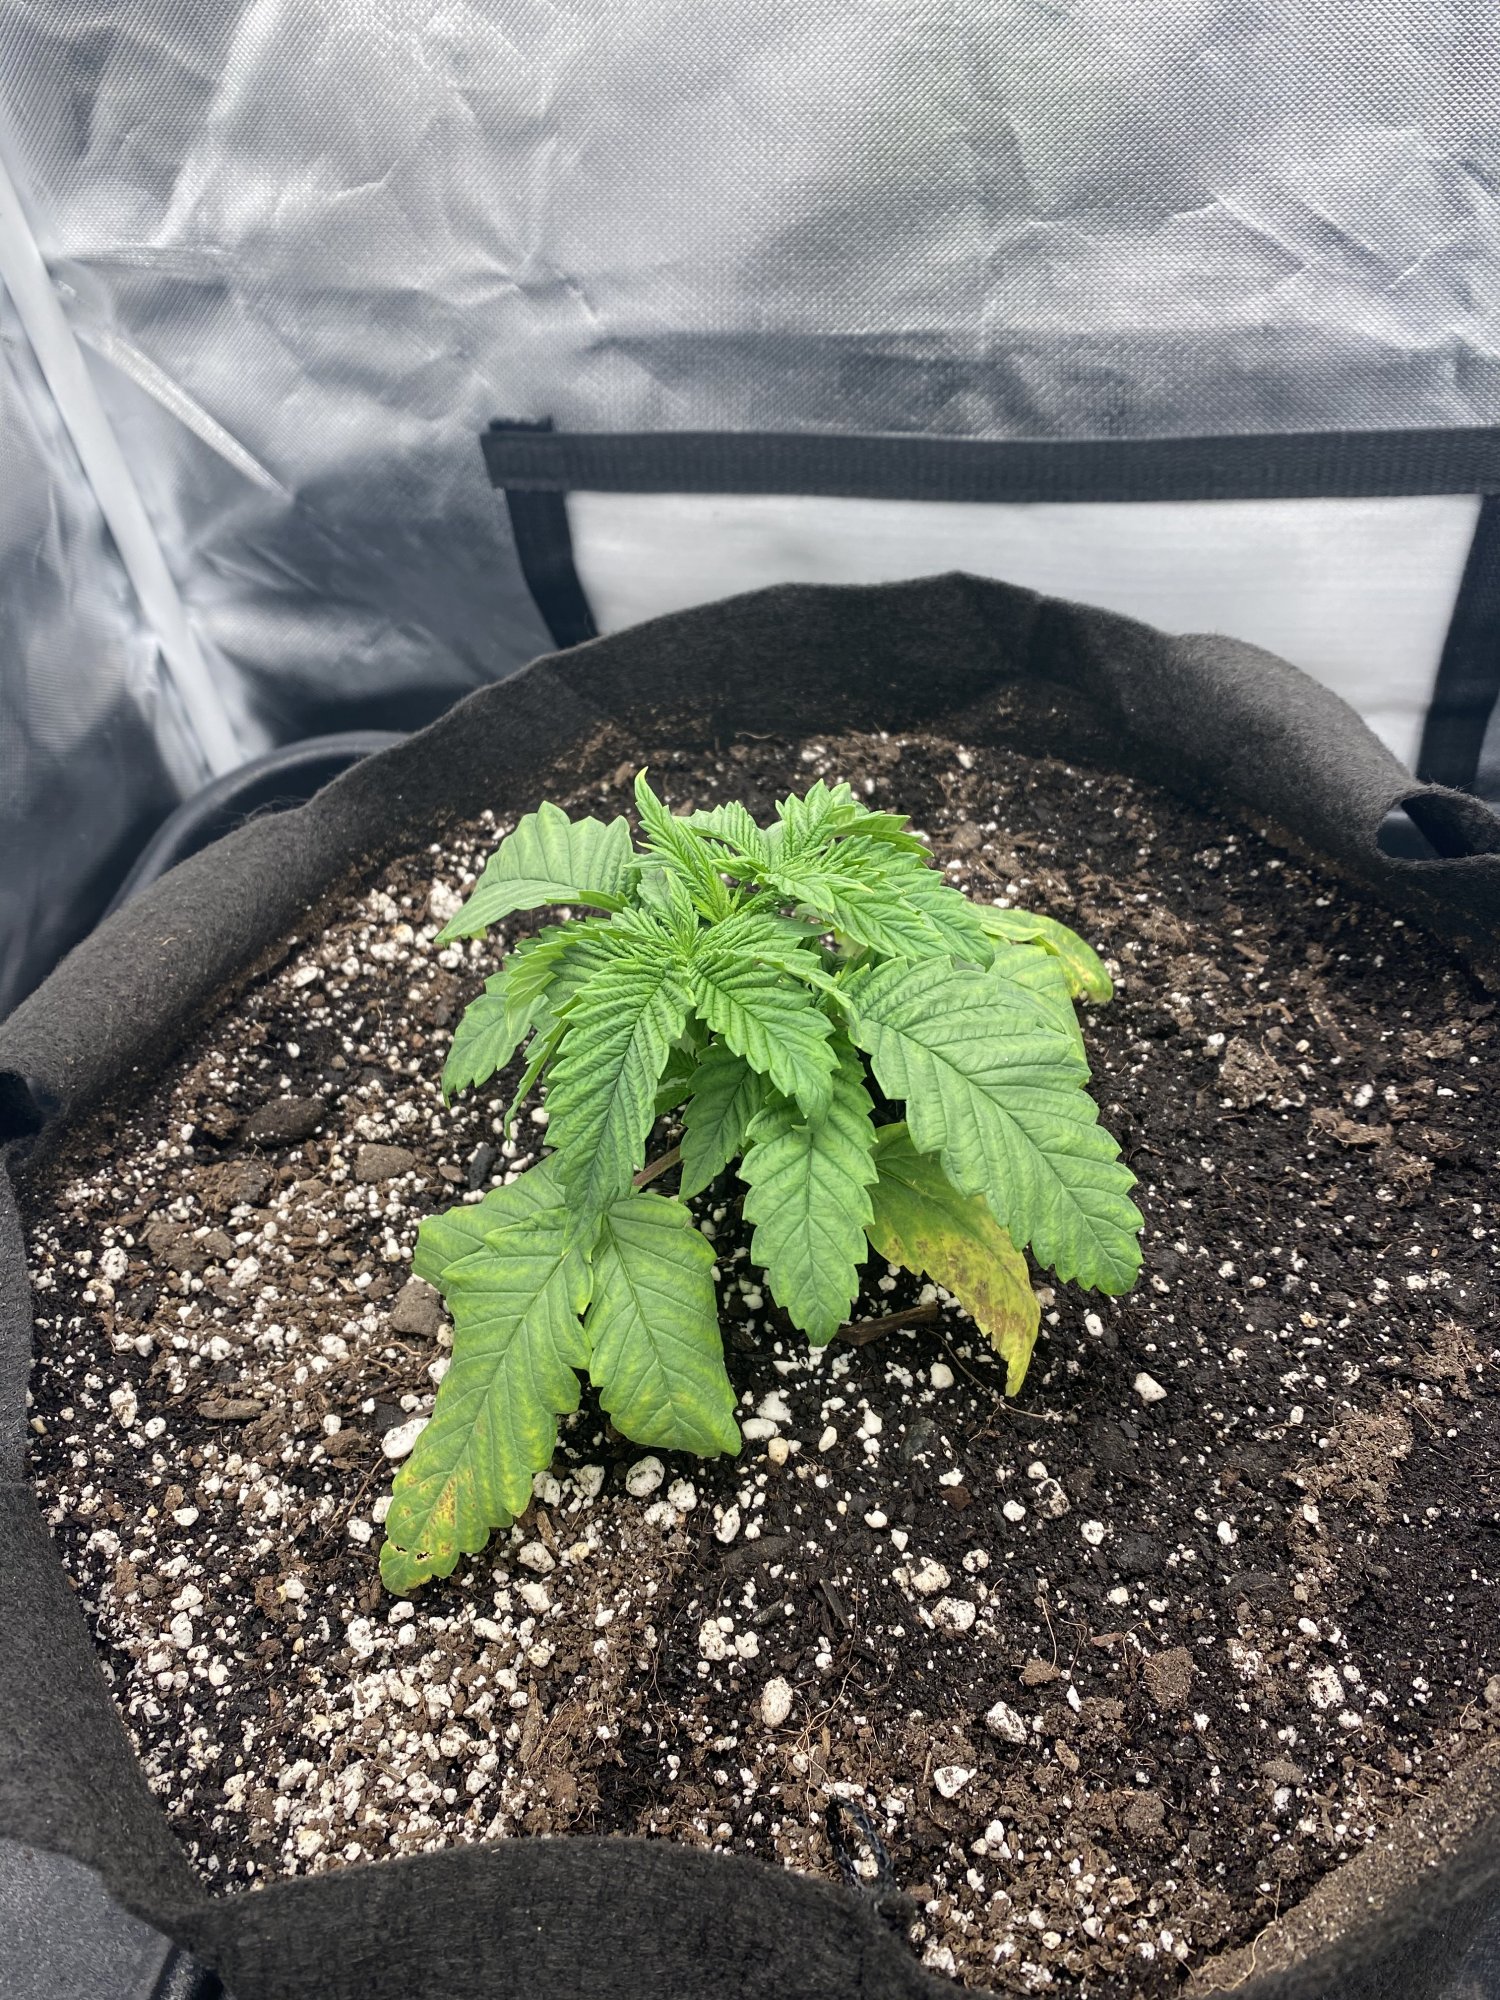 Droop and slow growth after transplant 2